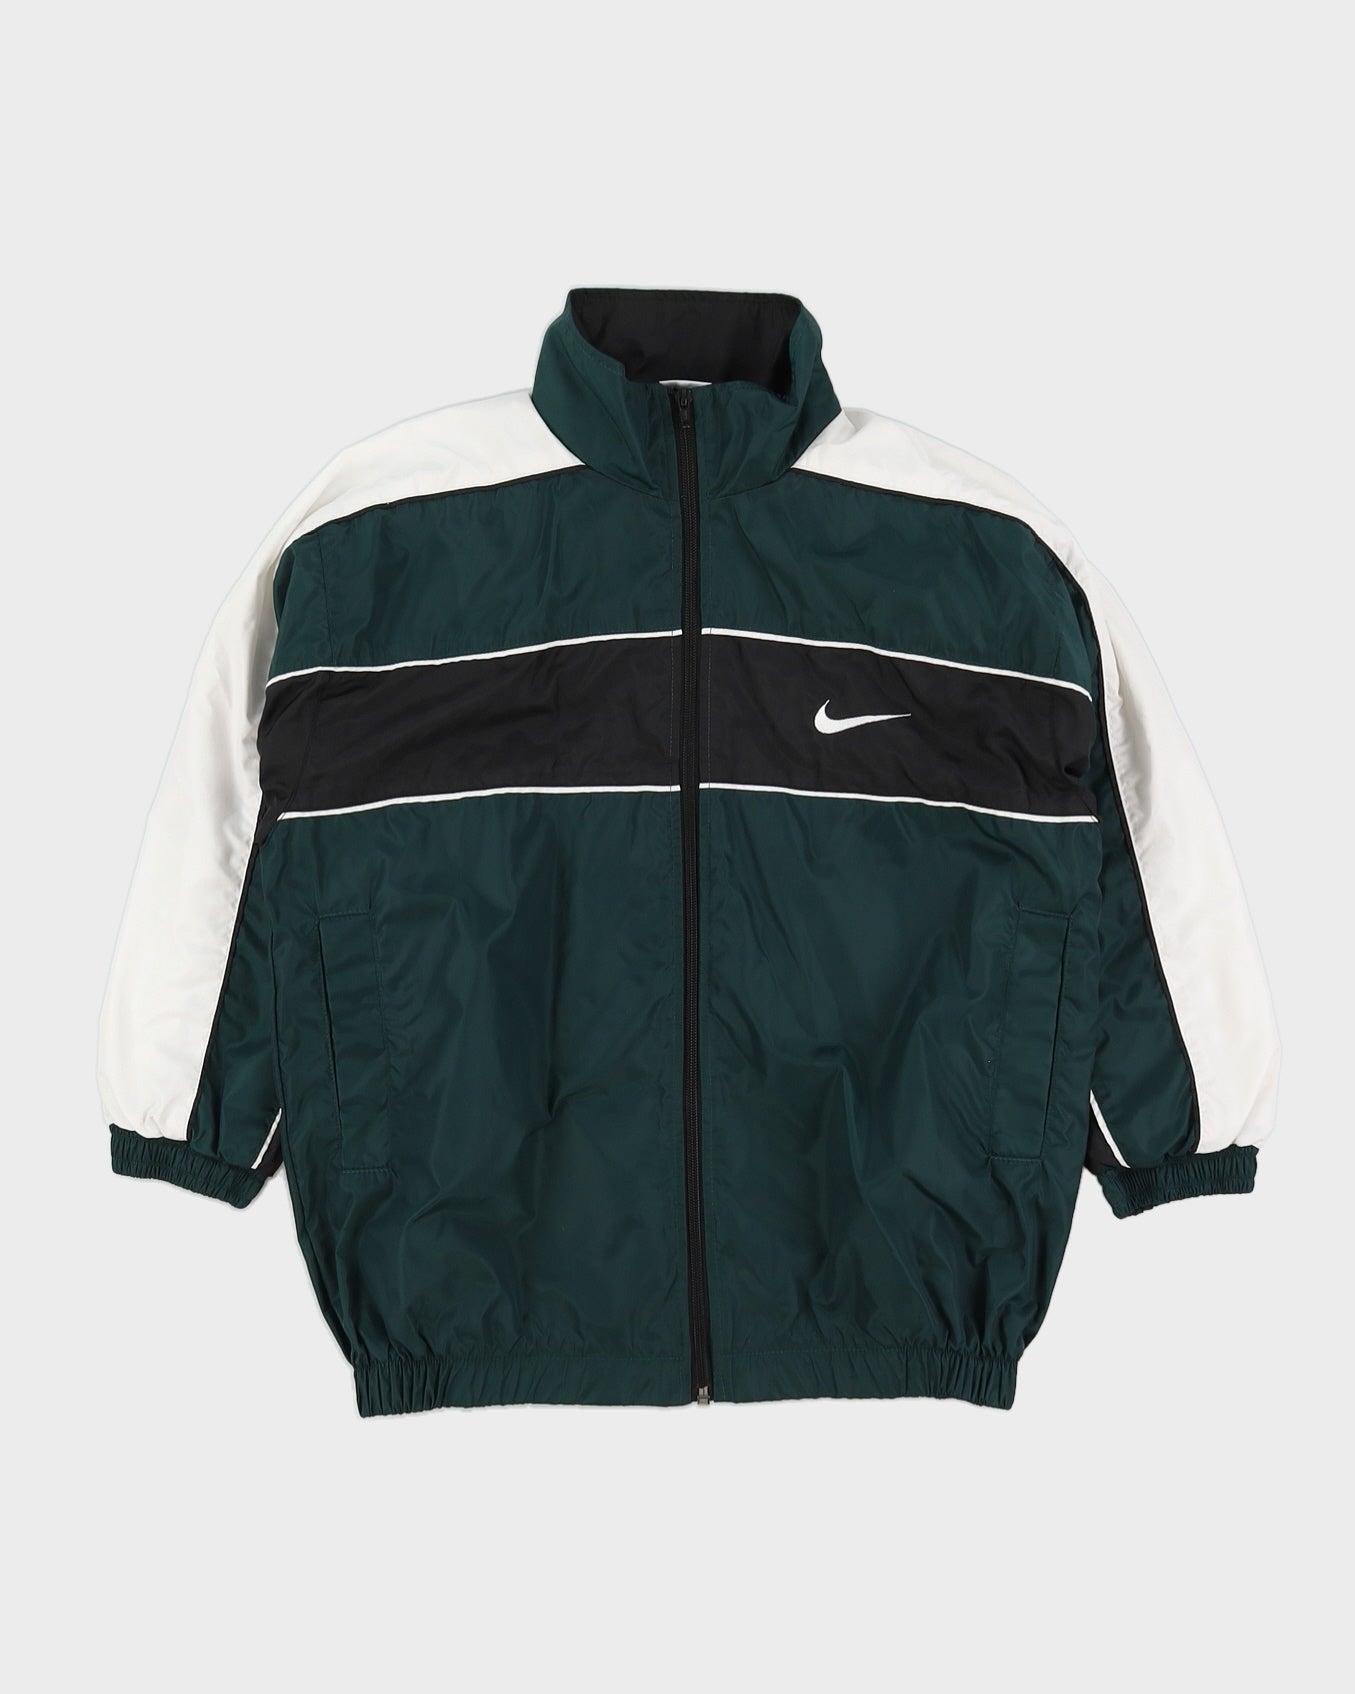 Vintage 90s Nike Green Track Jacket With Embroidery - S